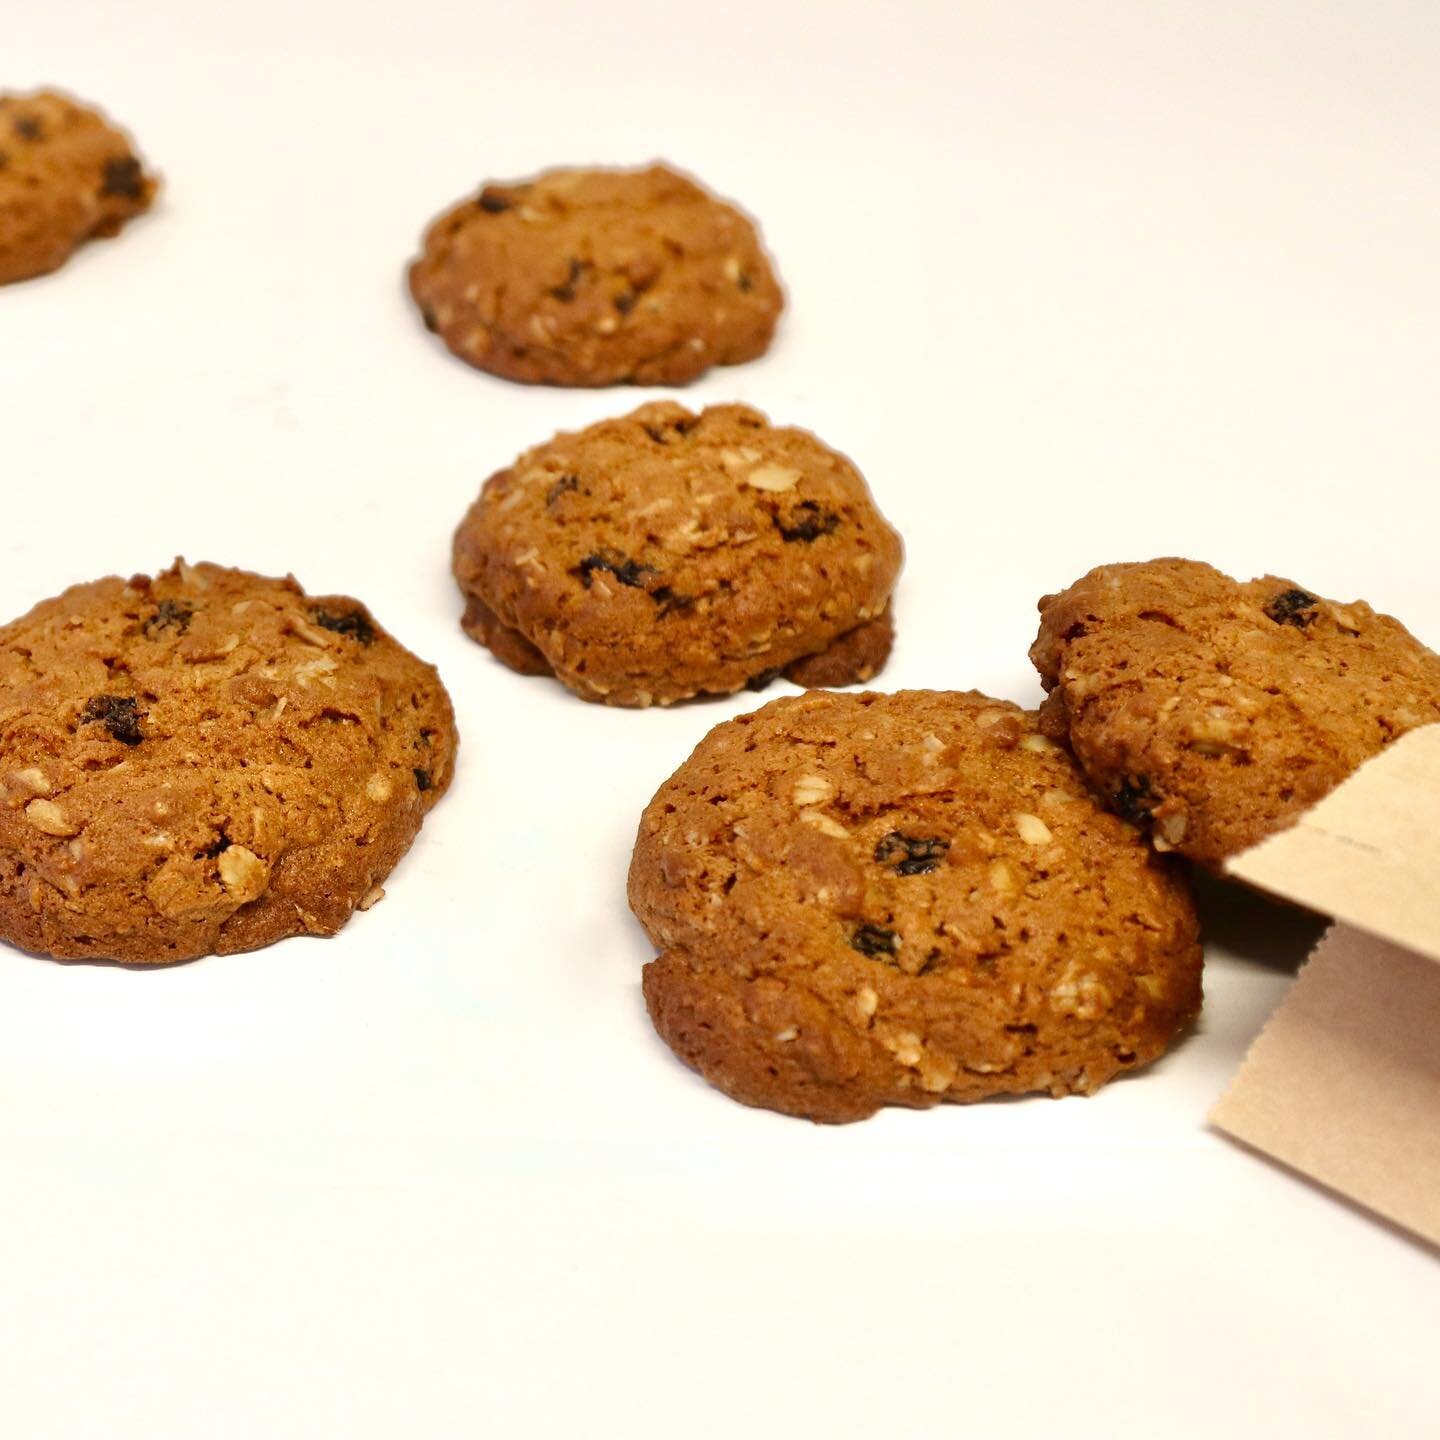 Oatmeal Raisin Cookies are usually a must when looking for a small and quick treat 🍪👨🏽&zwj;🍳 Starting at $1.25 each for large cookies or a package of six regular sized cookies for $2.50. Visit us on our website or call us 416-281-5614! ☺️